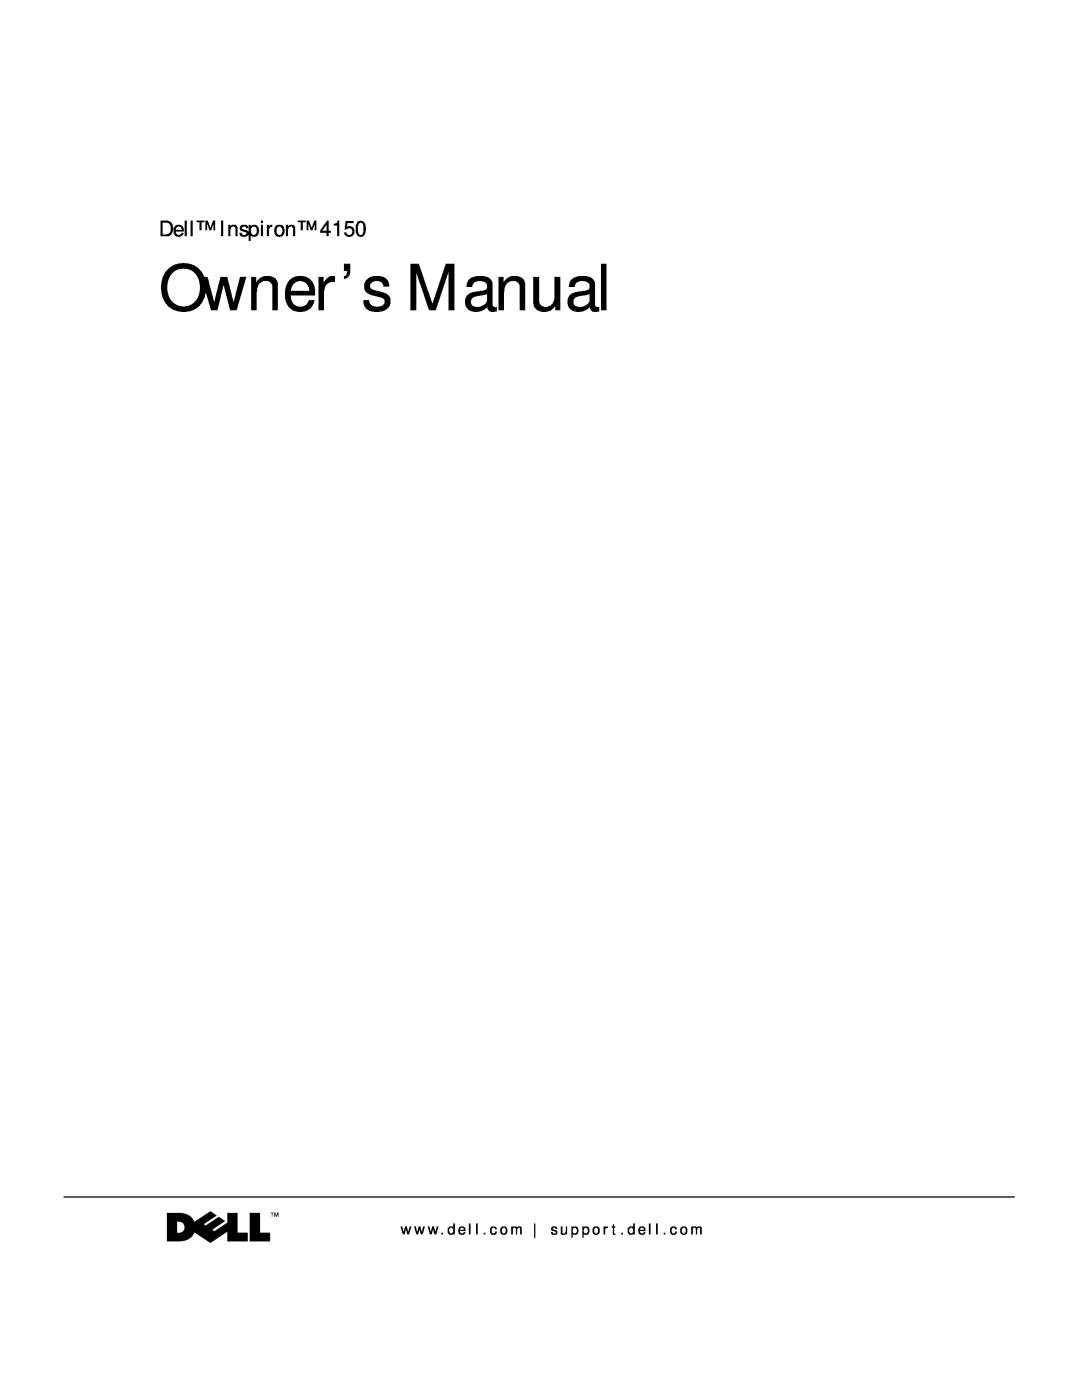 Dell 4150 owner manual Dell Inspiron, Owner’s Manual, w w w . d e l l . c o m s u p p o r t . d e l l . c o m 